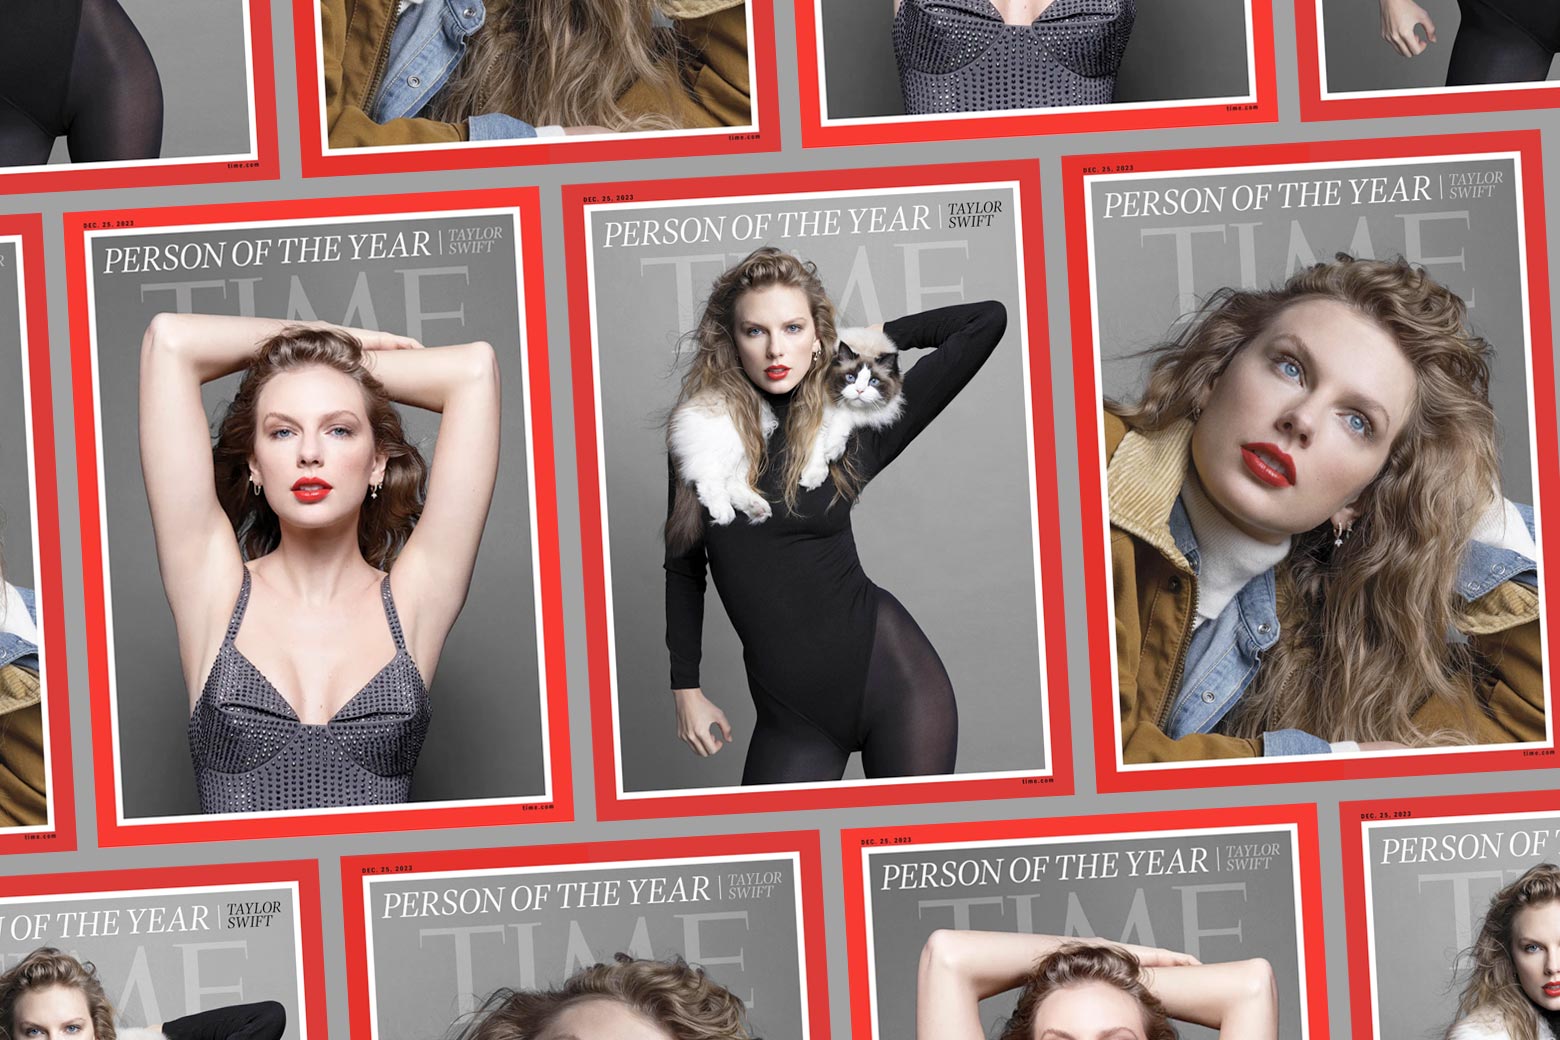 Taylor Swift is named Time magazine's person of the year